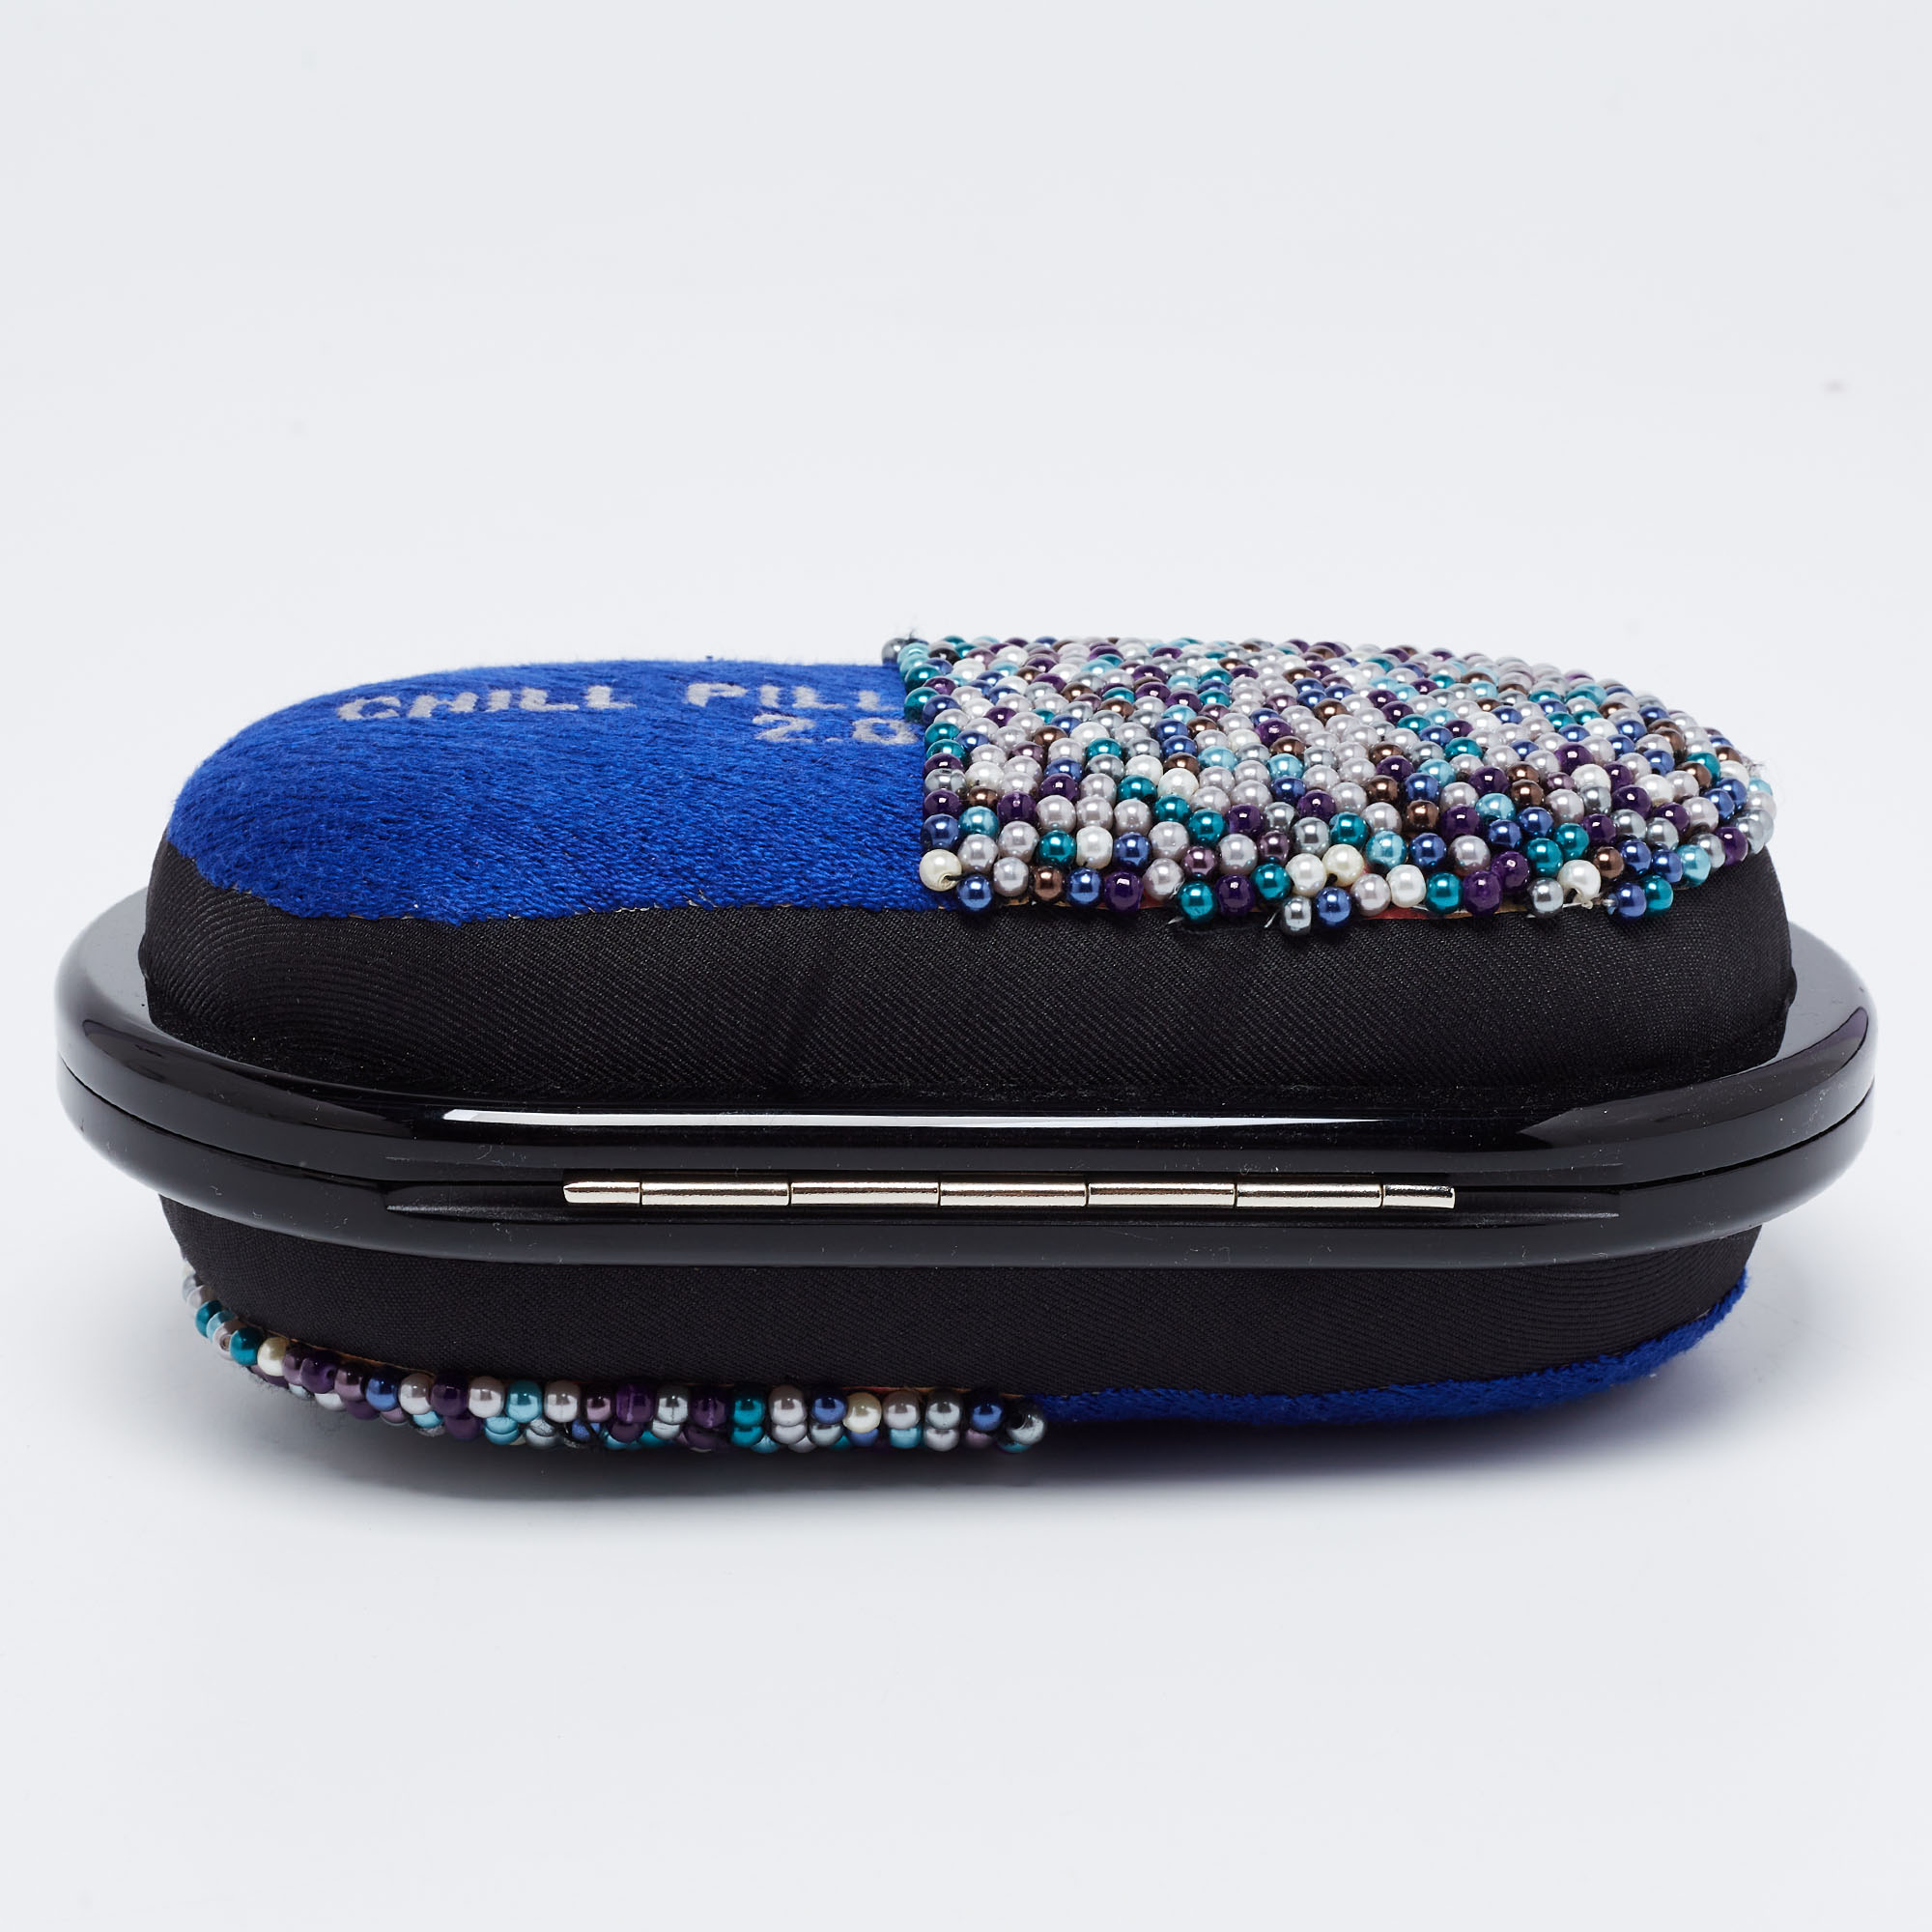 Sarah's Bag Blue/Multicolor Beaded Fabric Chill Pill 2.0 Chain Clutch